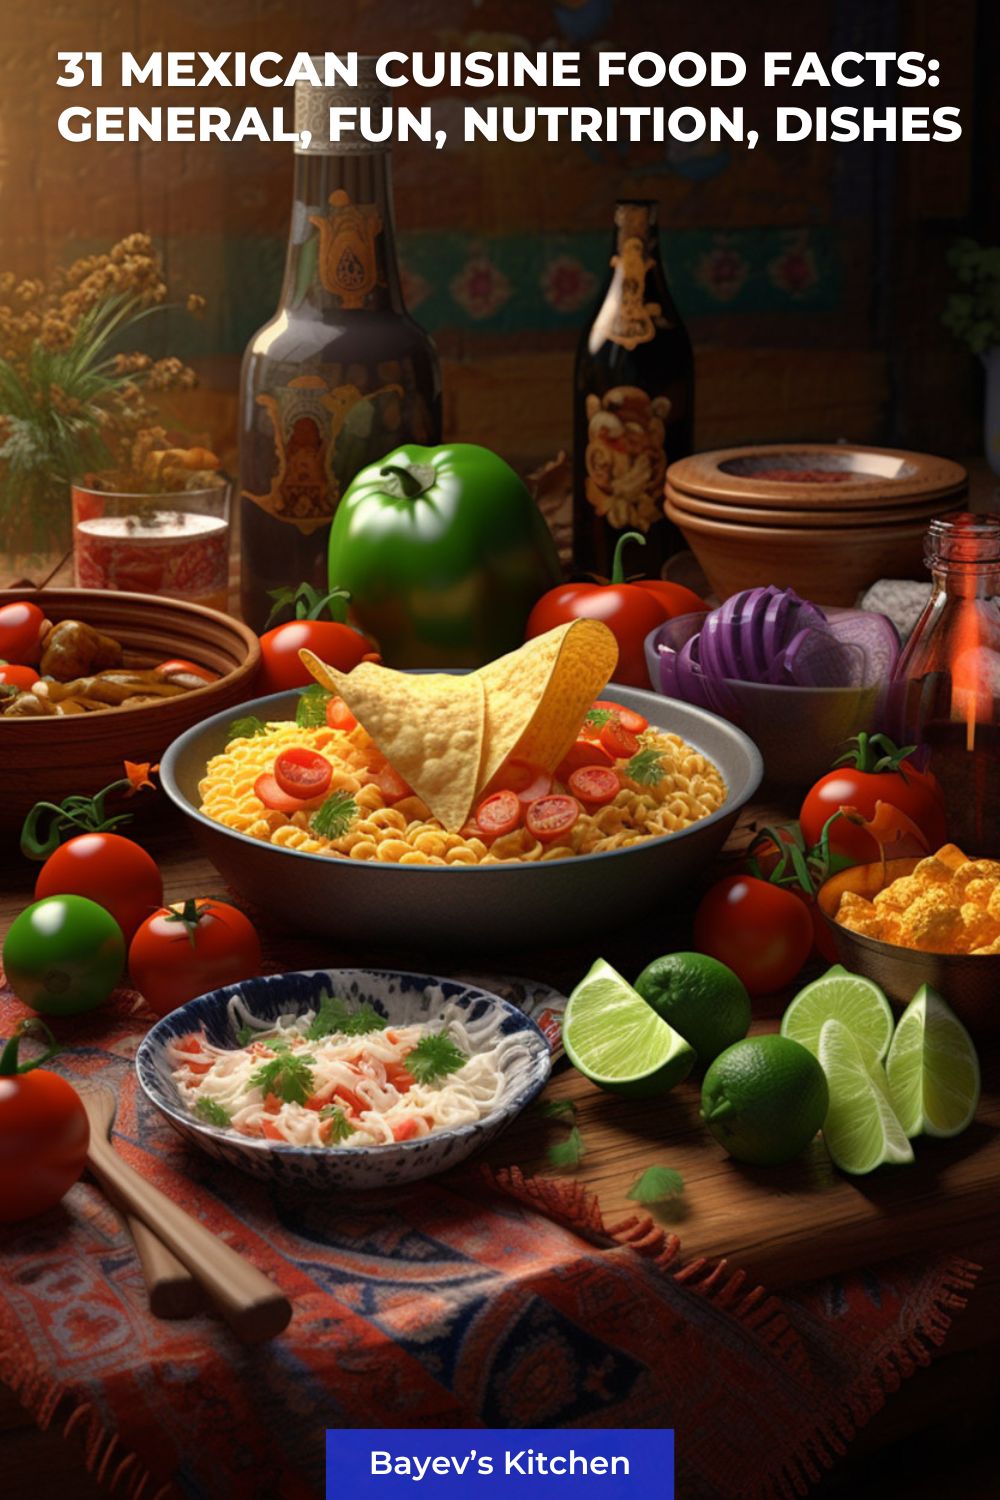 31 Mexican Cuisine Food Facts: General, Fun, Nutrition, Dishes by bayevskitchen.com